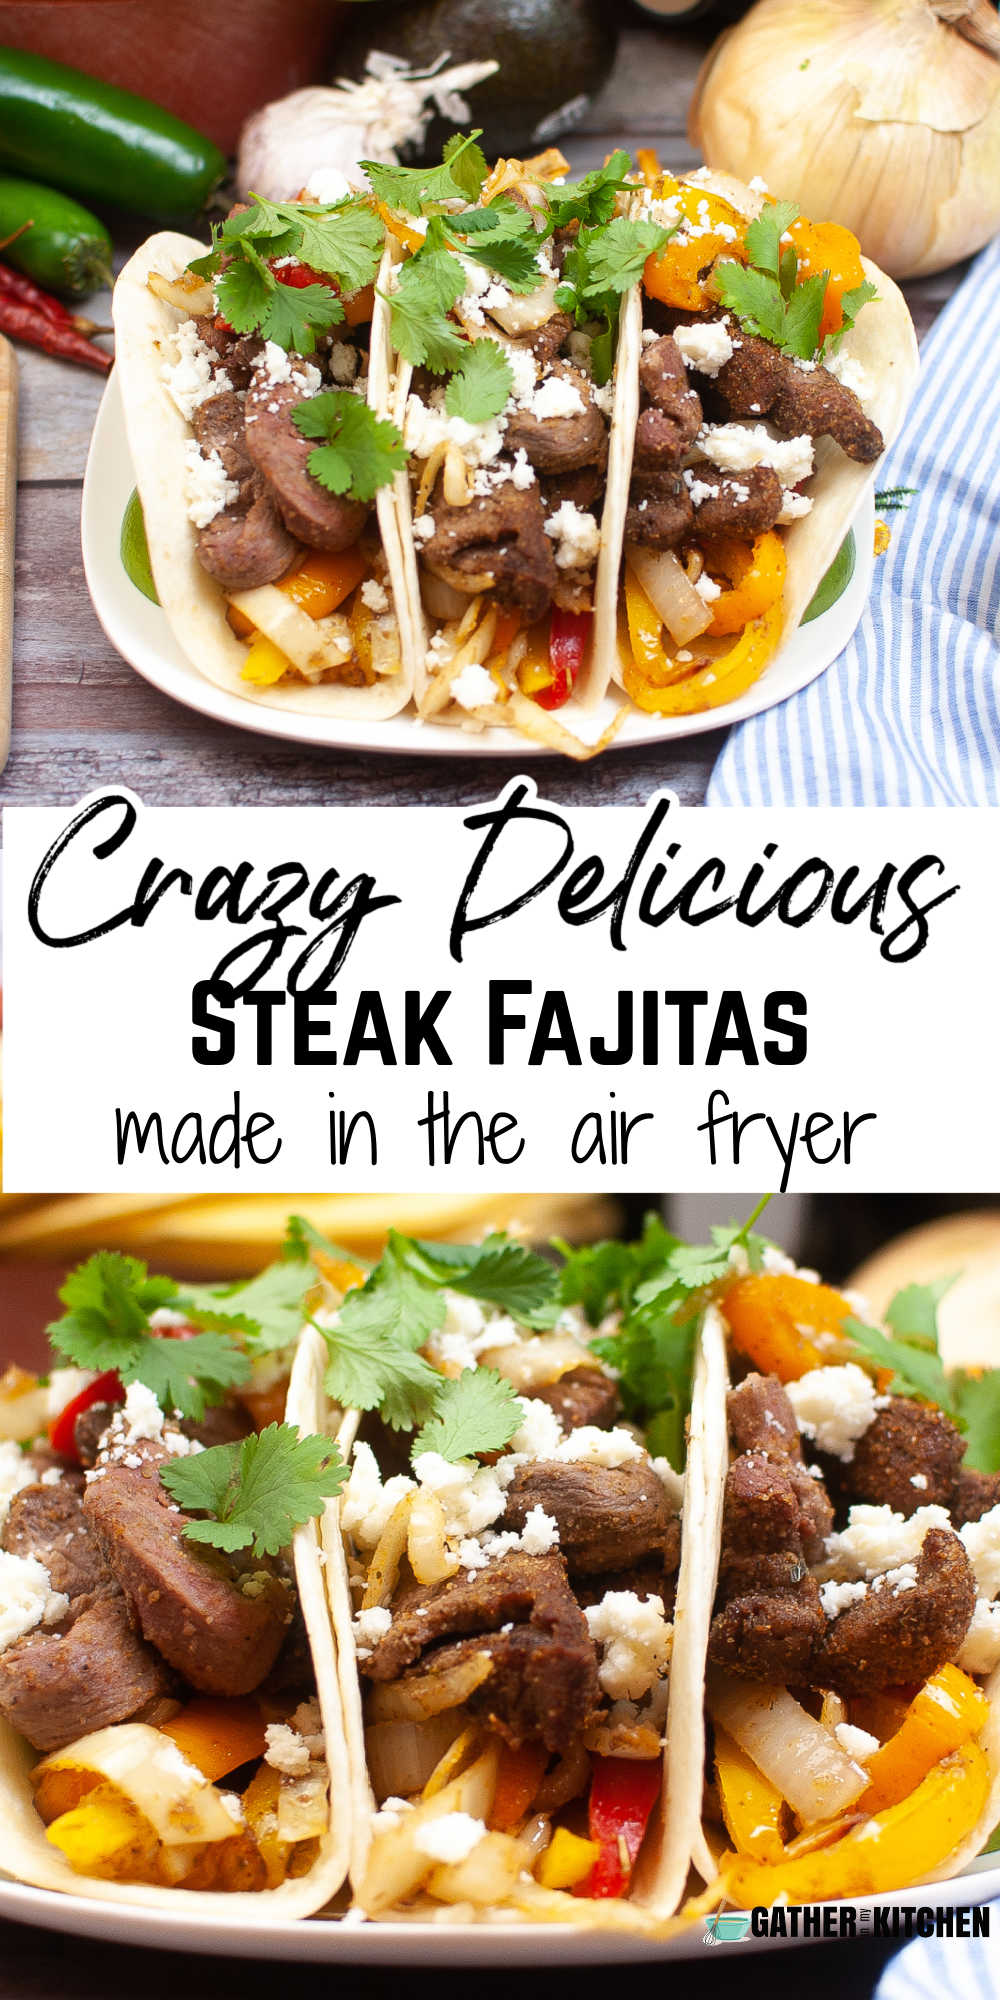 Pin image: top is side view of three fajitas on a plate, middle says "Crazy Delicious Steak Fajitas made in the air fryer" and bottom has a closeup of the steak fajitas.